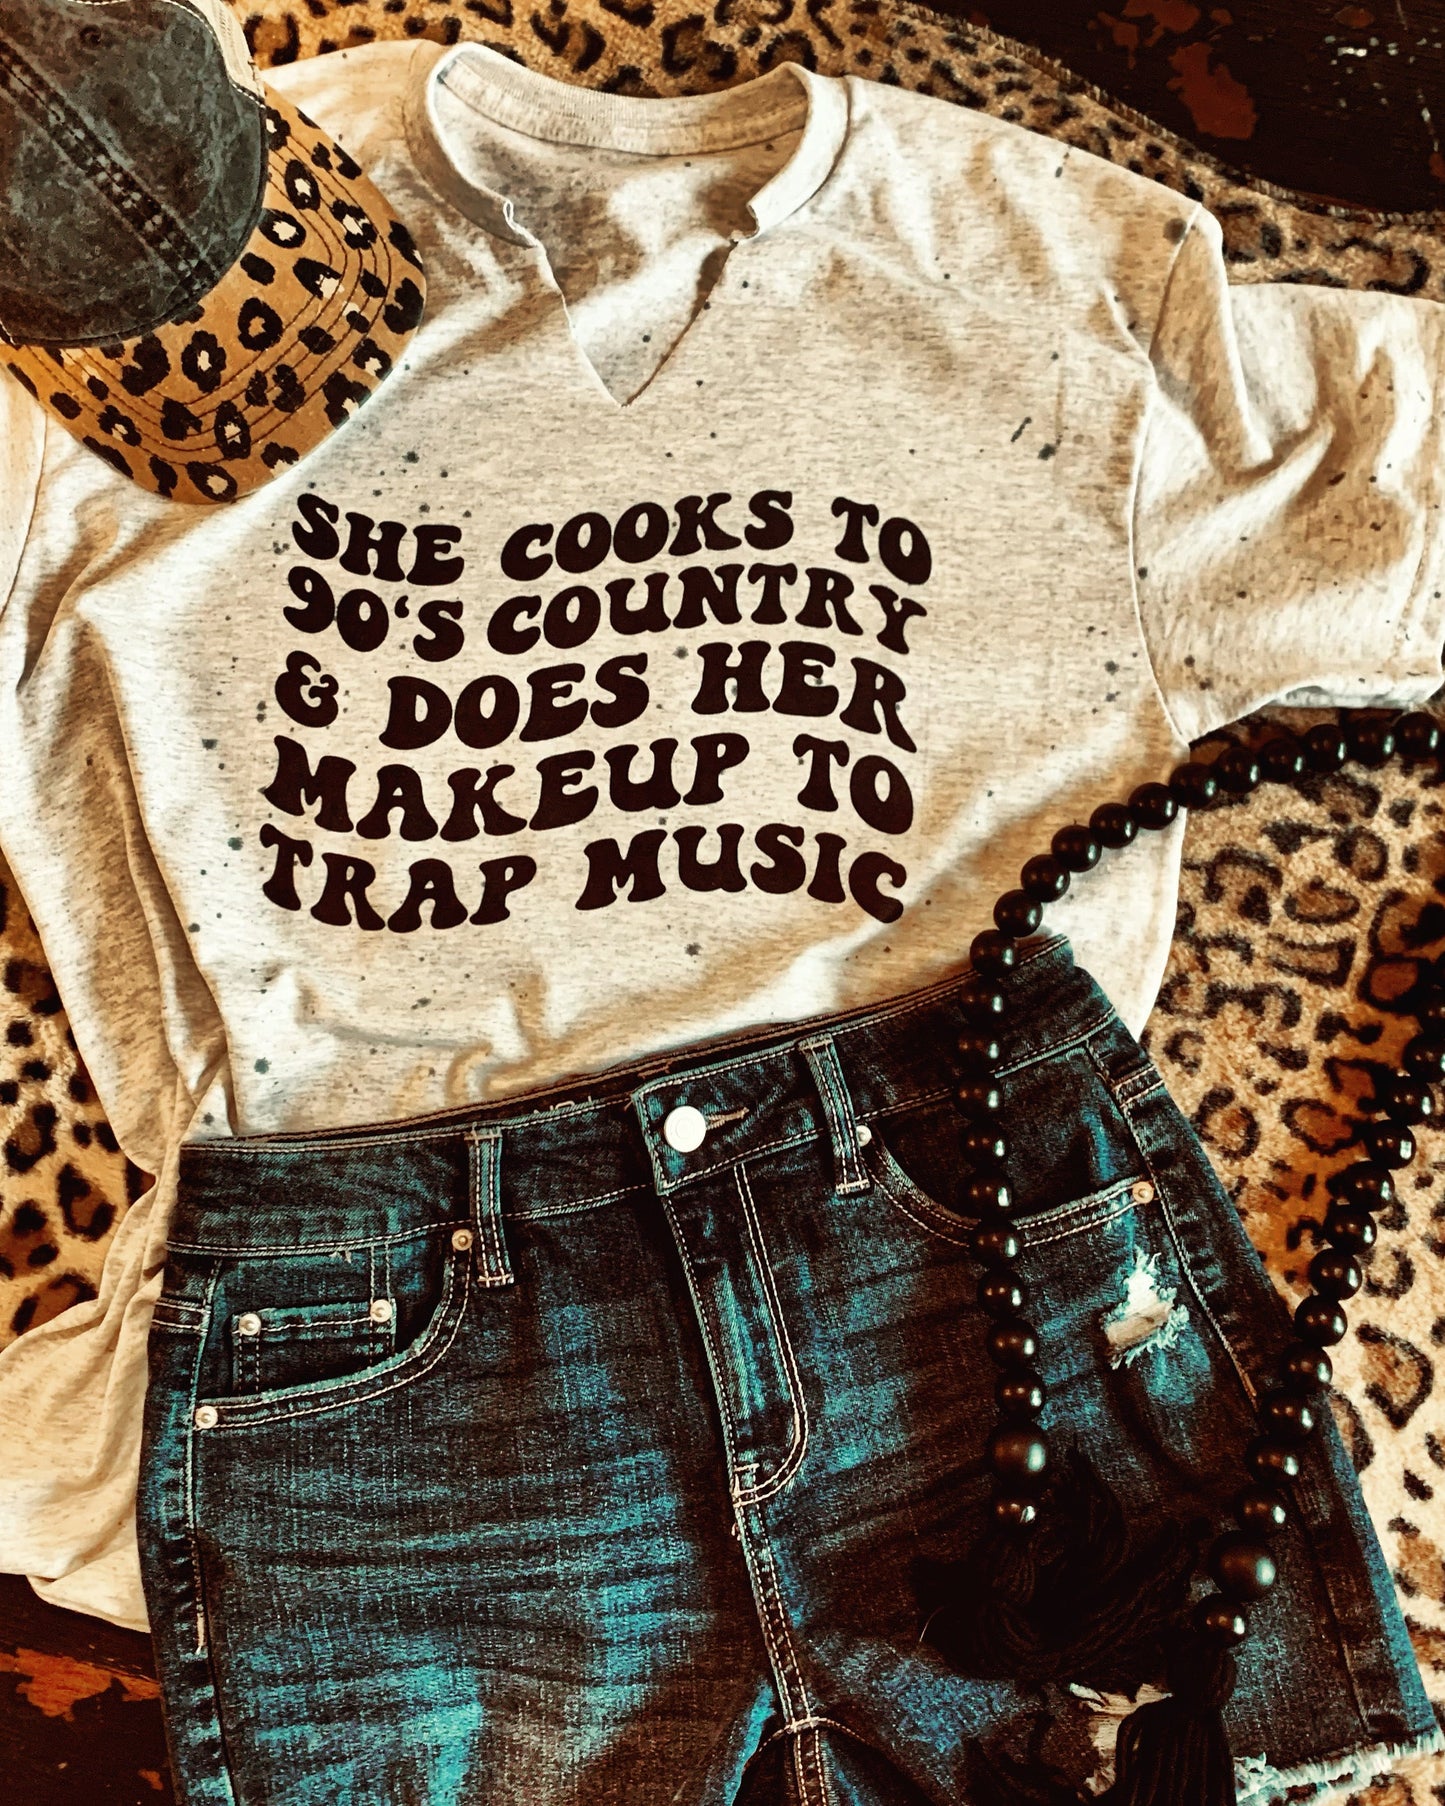 She cooks to 90’s country and does her Makeup to